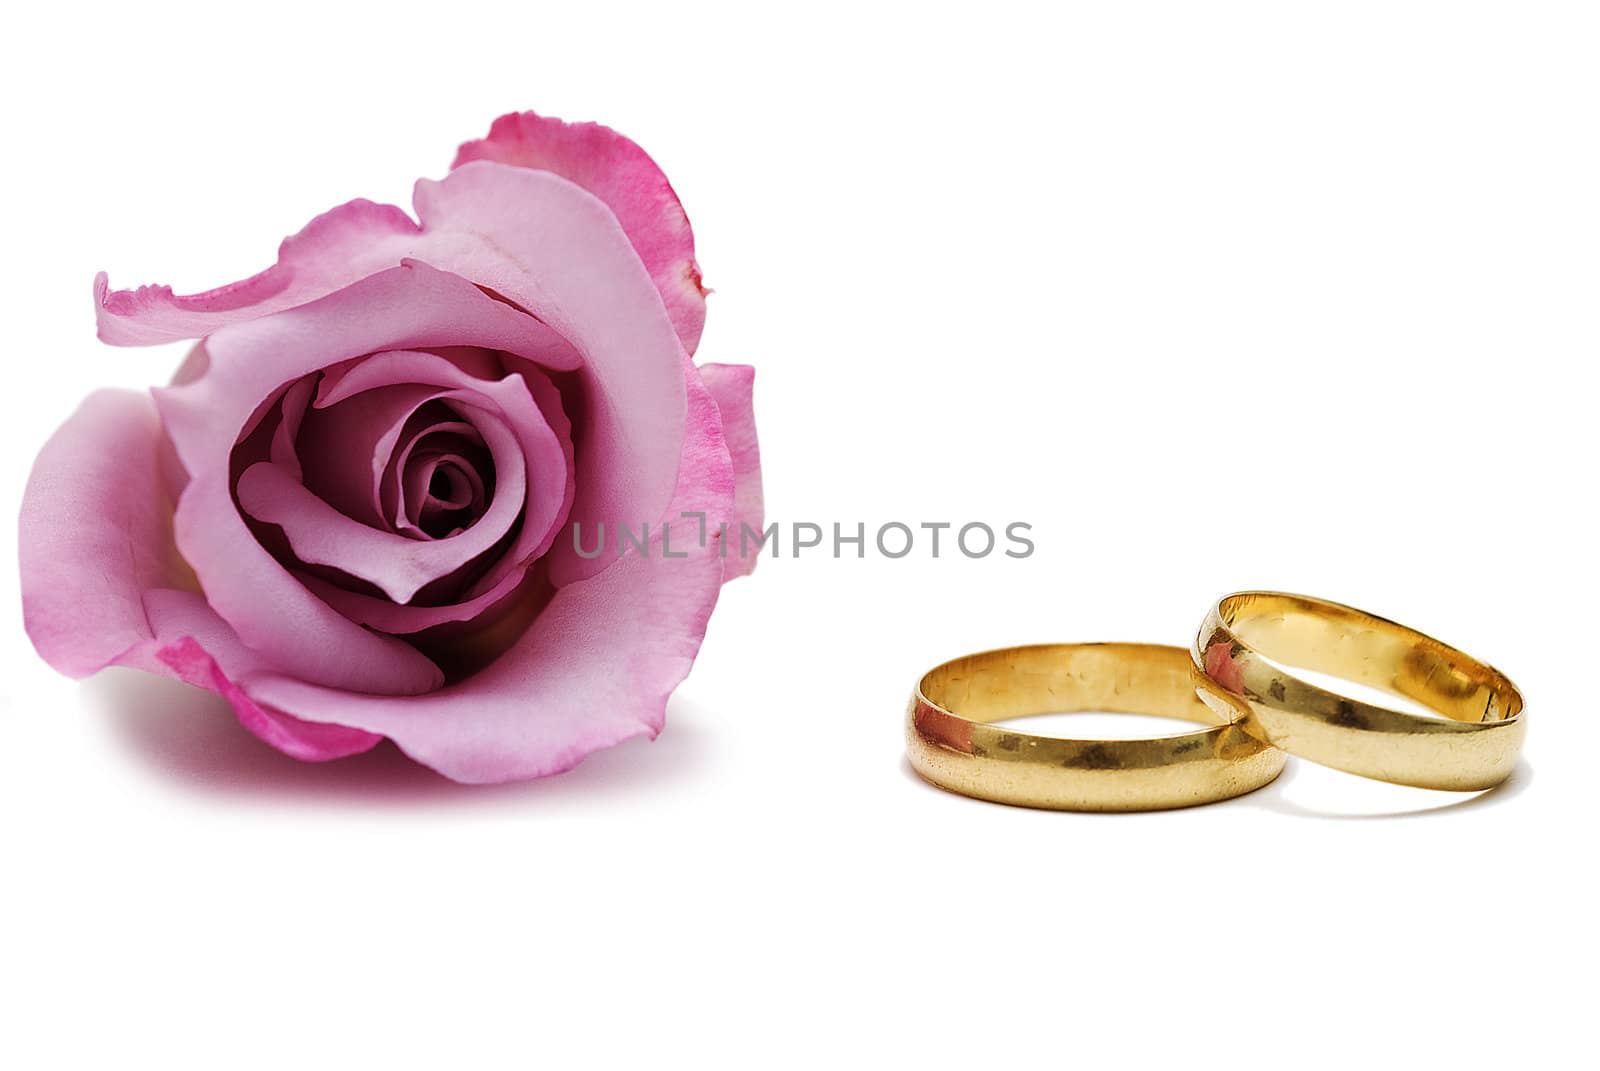 Pink rose and wedding rings over white. by angelsimon